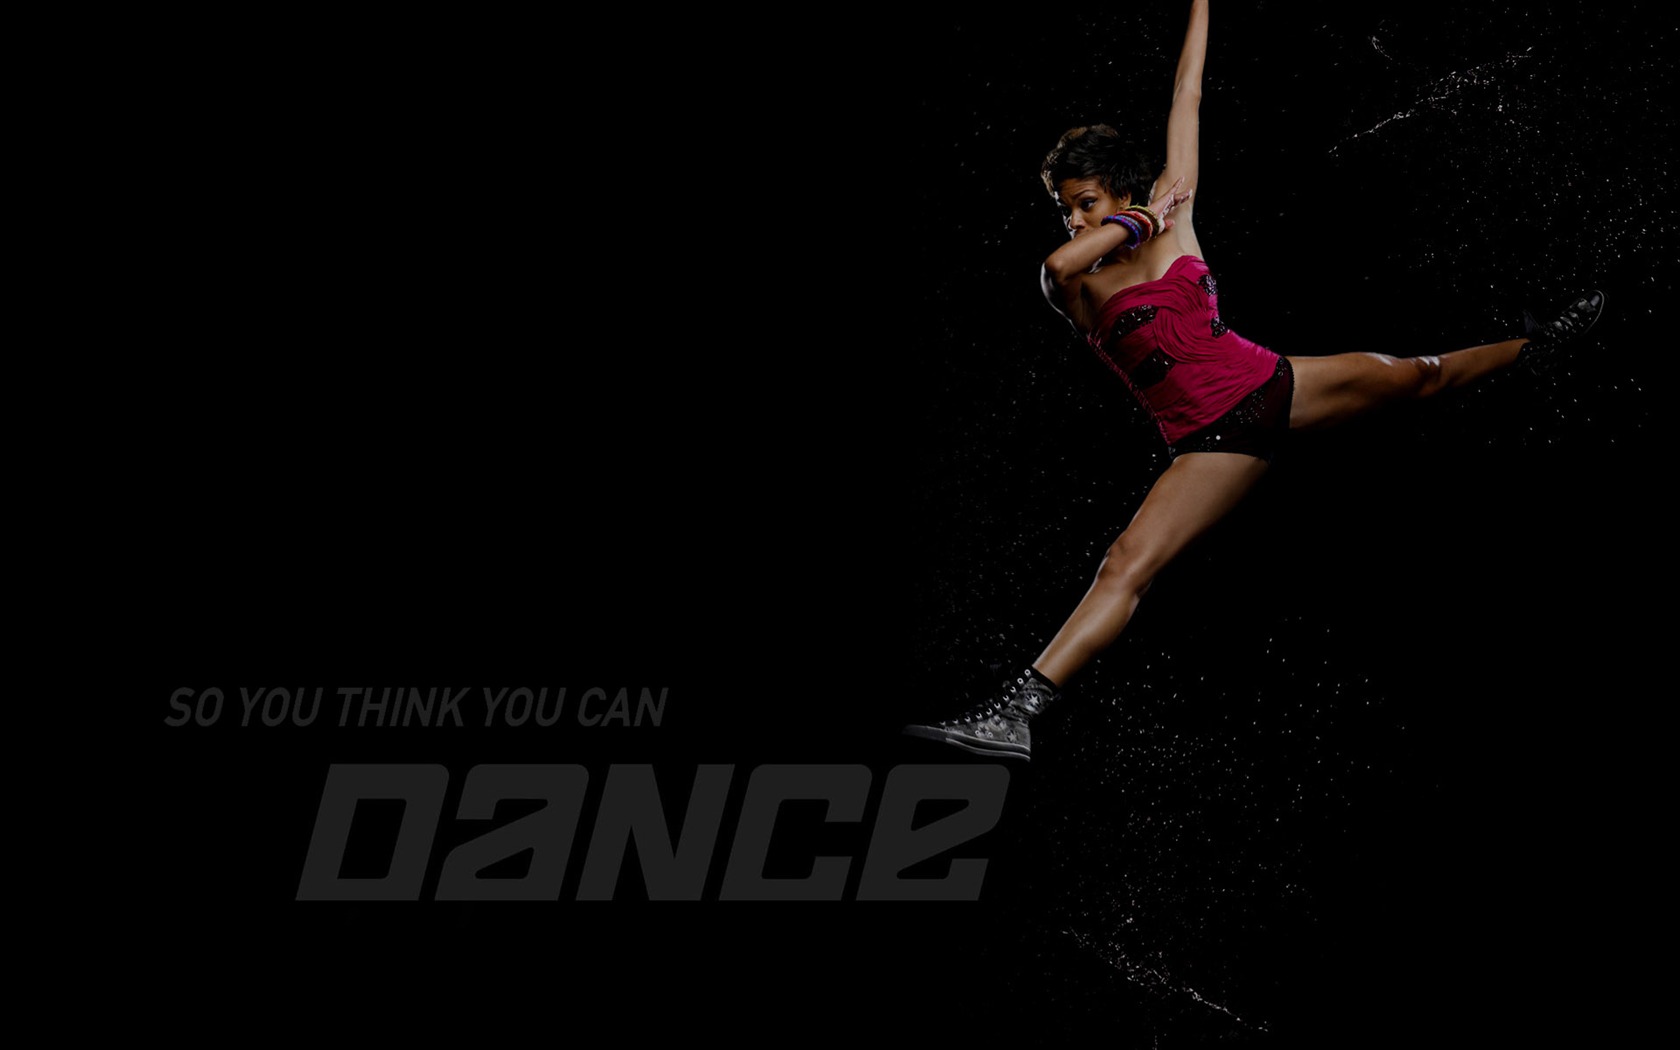 So You Think You Can Dance 舞林争霸 壁纸(二)15 - 1680x1050